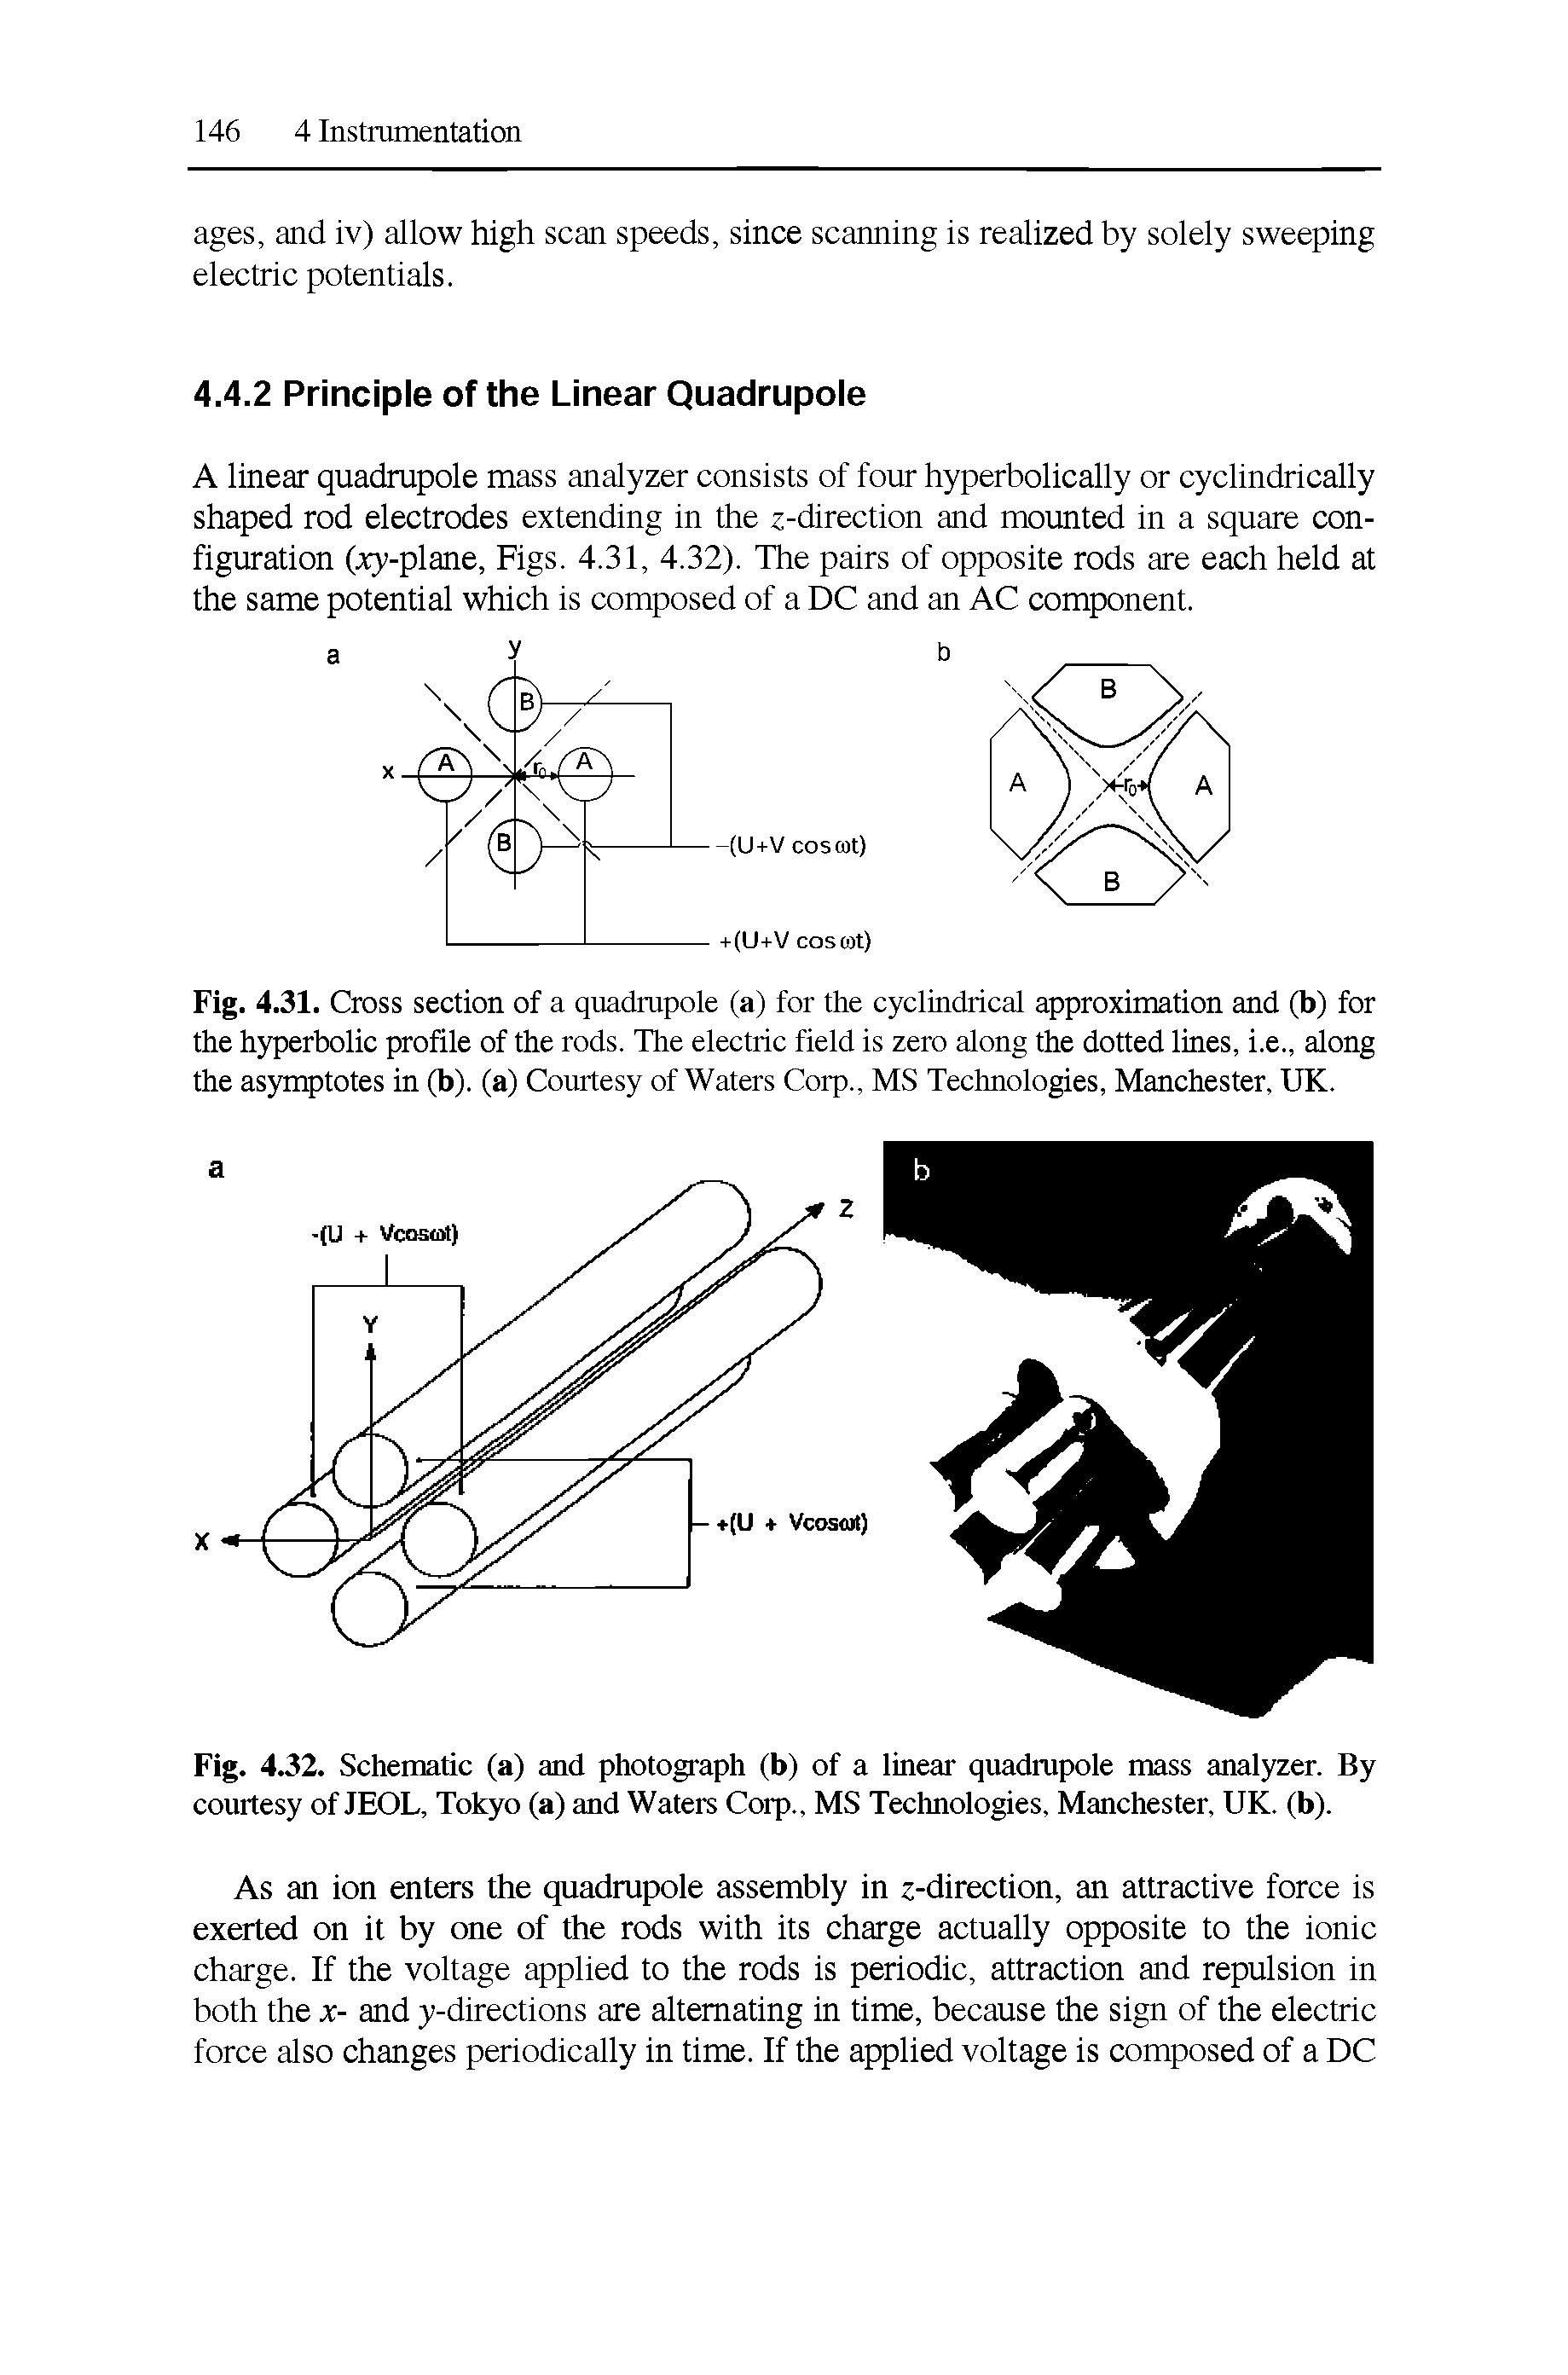 Fig. 4. 32. Schematic (a) and photograph (b) of a linear quadrupole mass analyzer. By courtesy of JEOL, Tokyo (a) and Waters Corp., MS Technologies, Manchester, UK. (b).